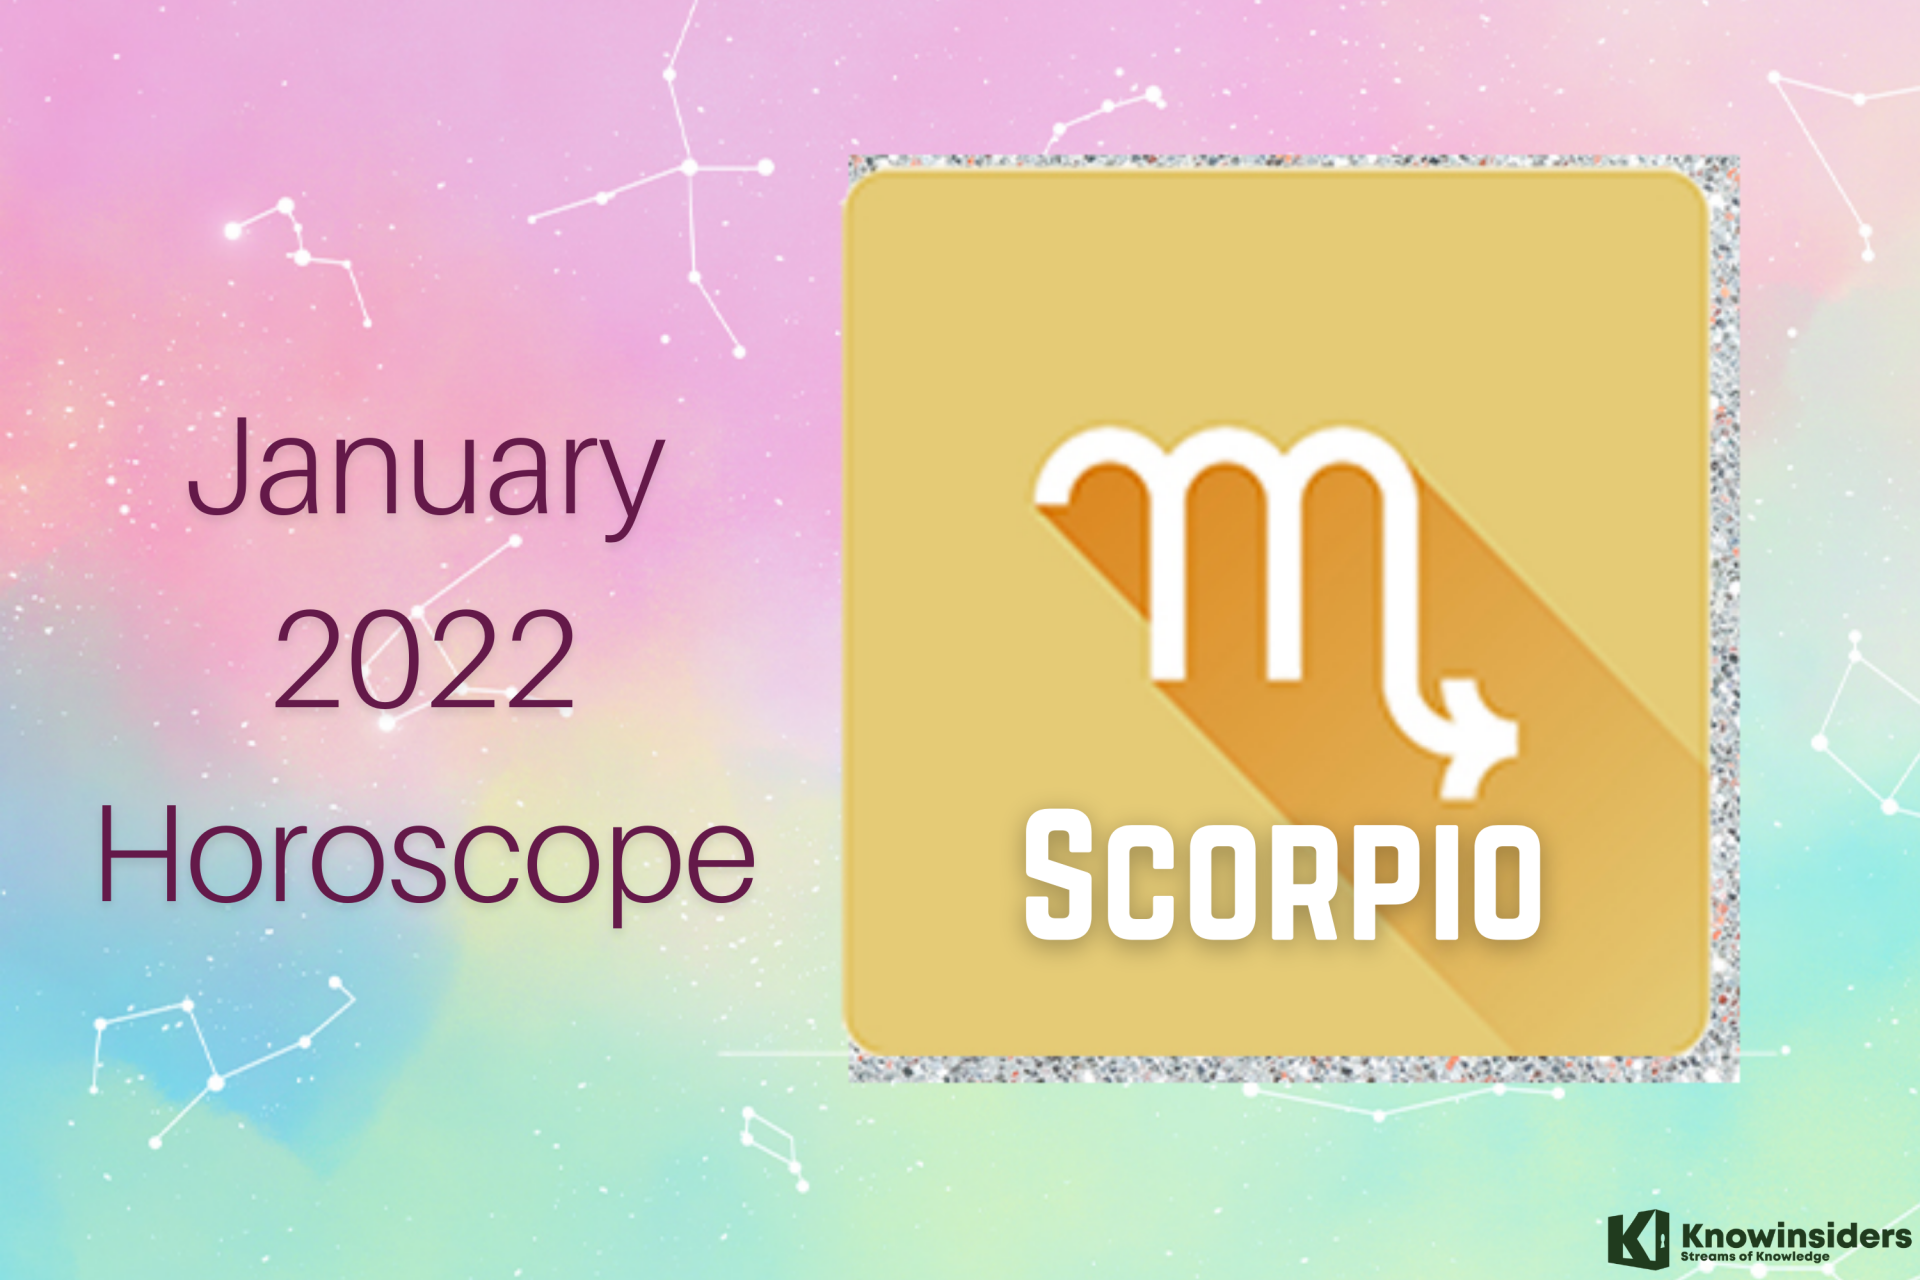 SCORPIO January 2022 Horoscope: Monthly Prediction for Love, Career, Money and Health